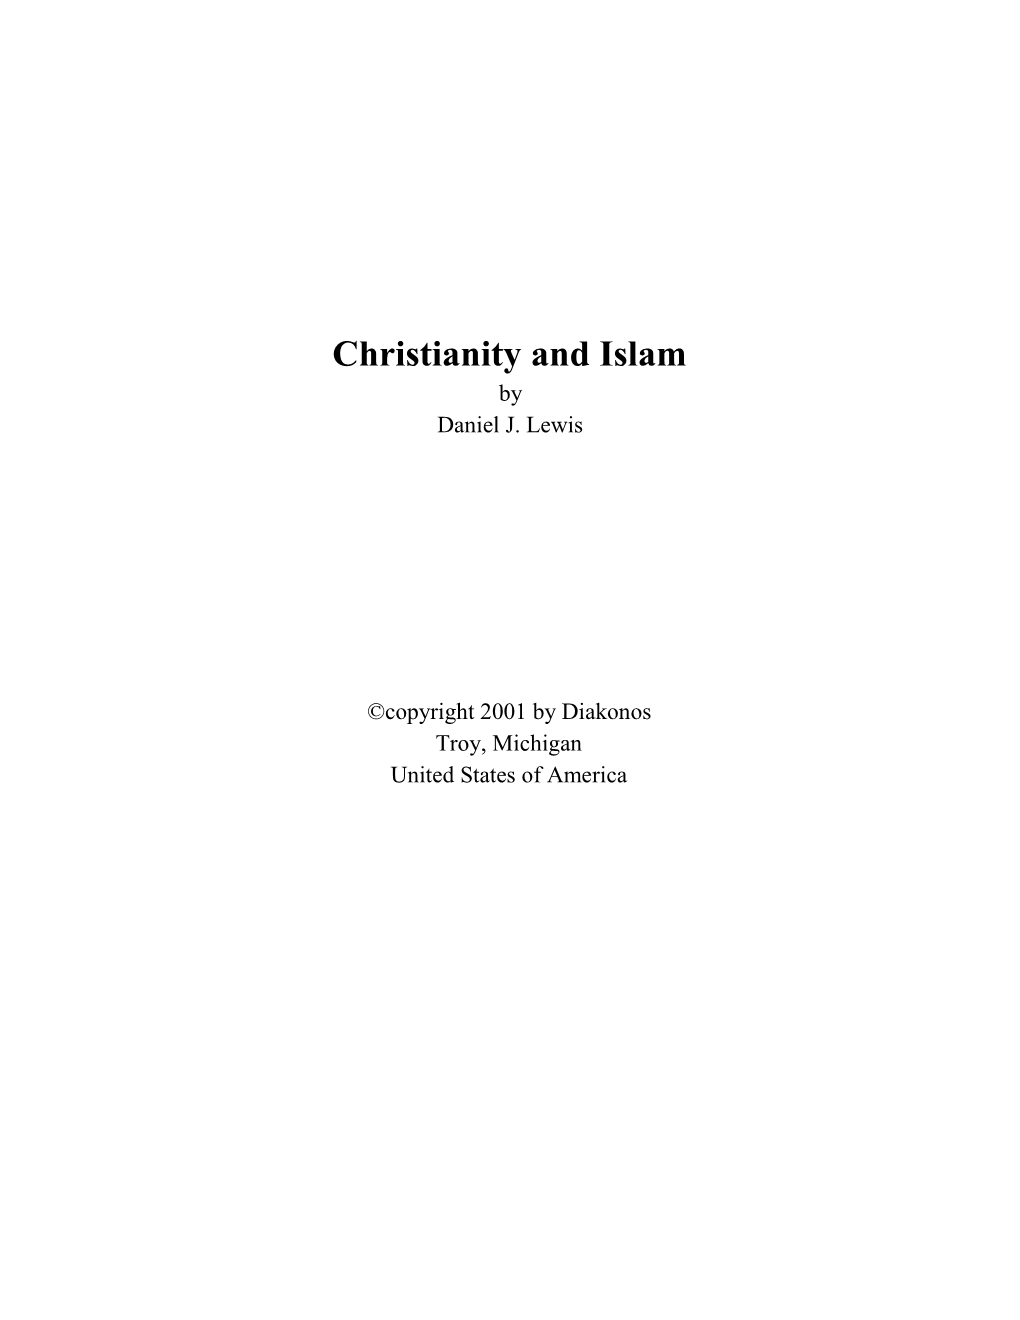 Christianity and Islam by Daniel J